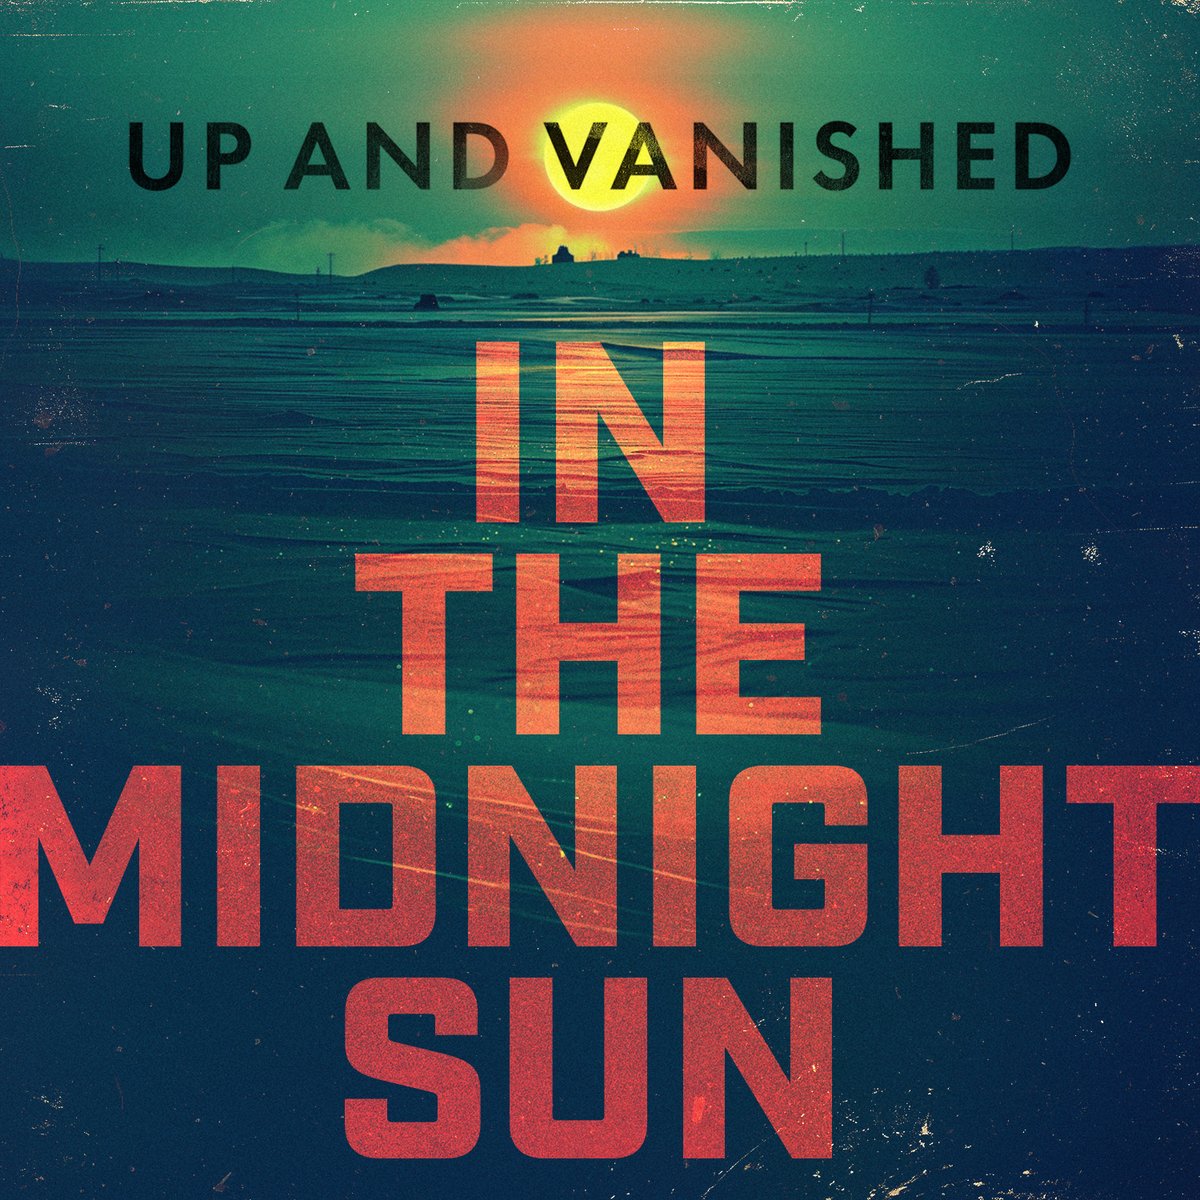 An all-new season of @upandvanished premieres TOMORROW! Join @paynelindsey as he travels to the rugged Alaskan frontier to investigate the disappearance of Florence Okpealuk a 33-year-old woman from Nome, Alaska. Tune in wherever you get your podcasts. lnk.to/upandvanished